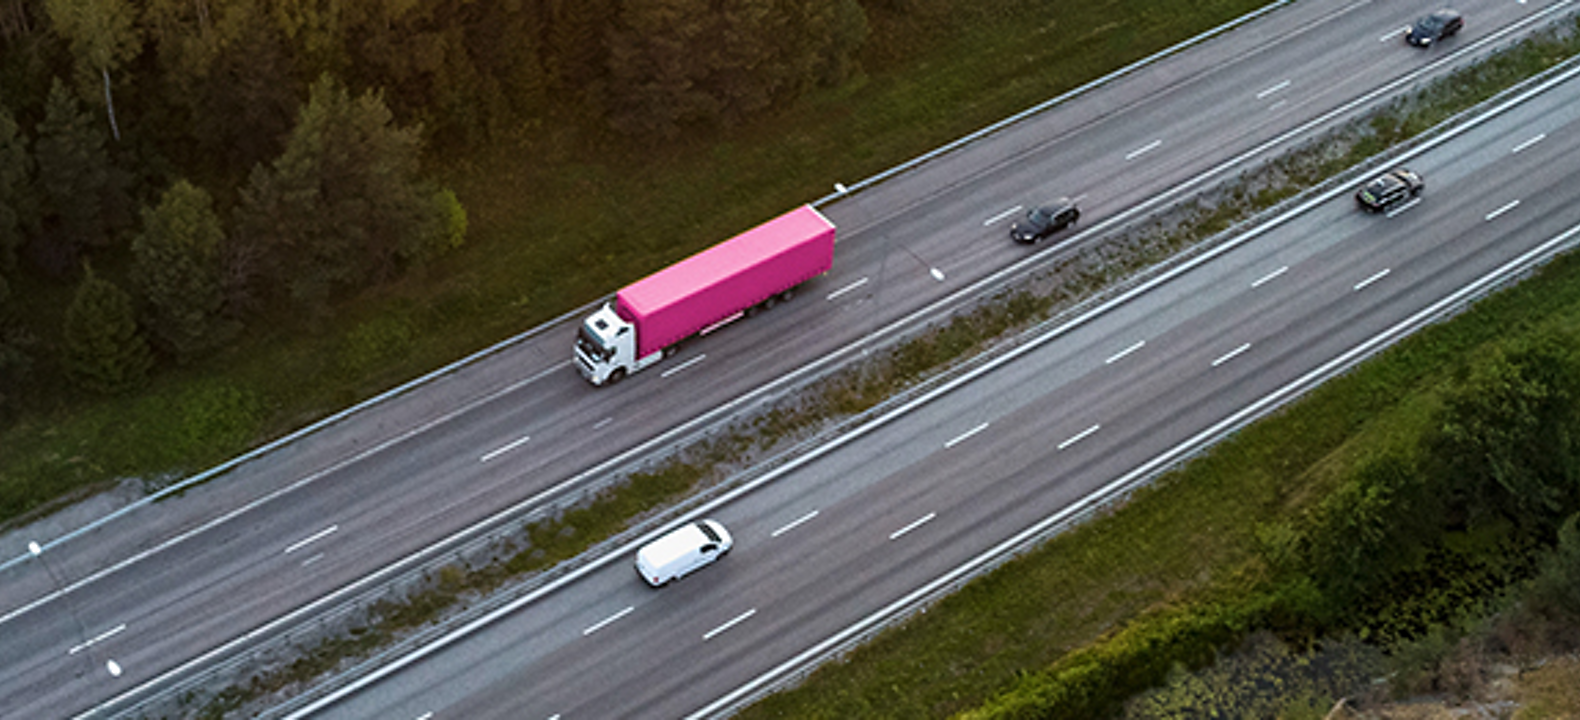 Overhead view of a highway with a white van and big rig with magenta and white colors 